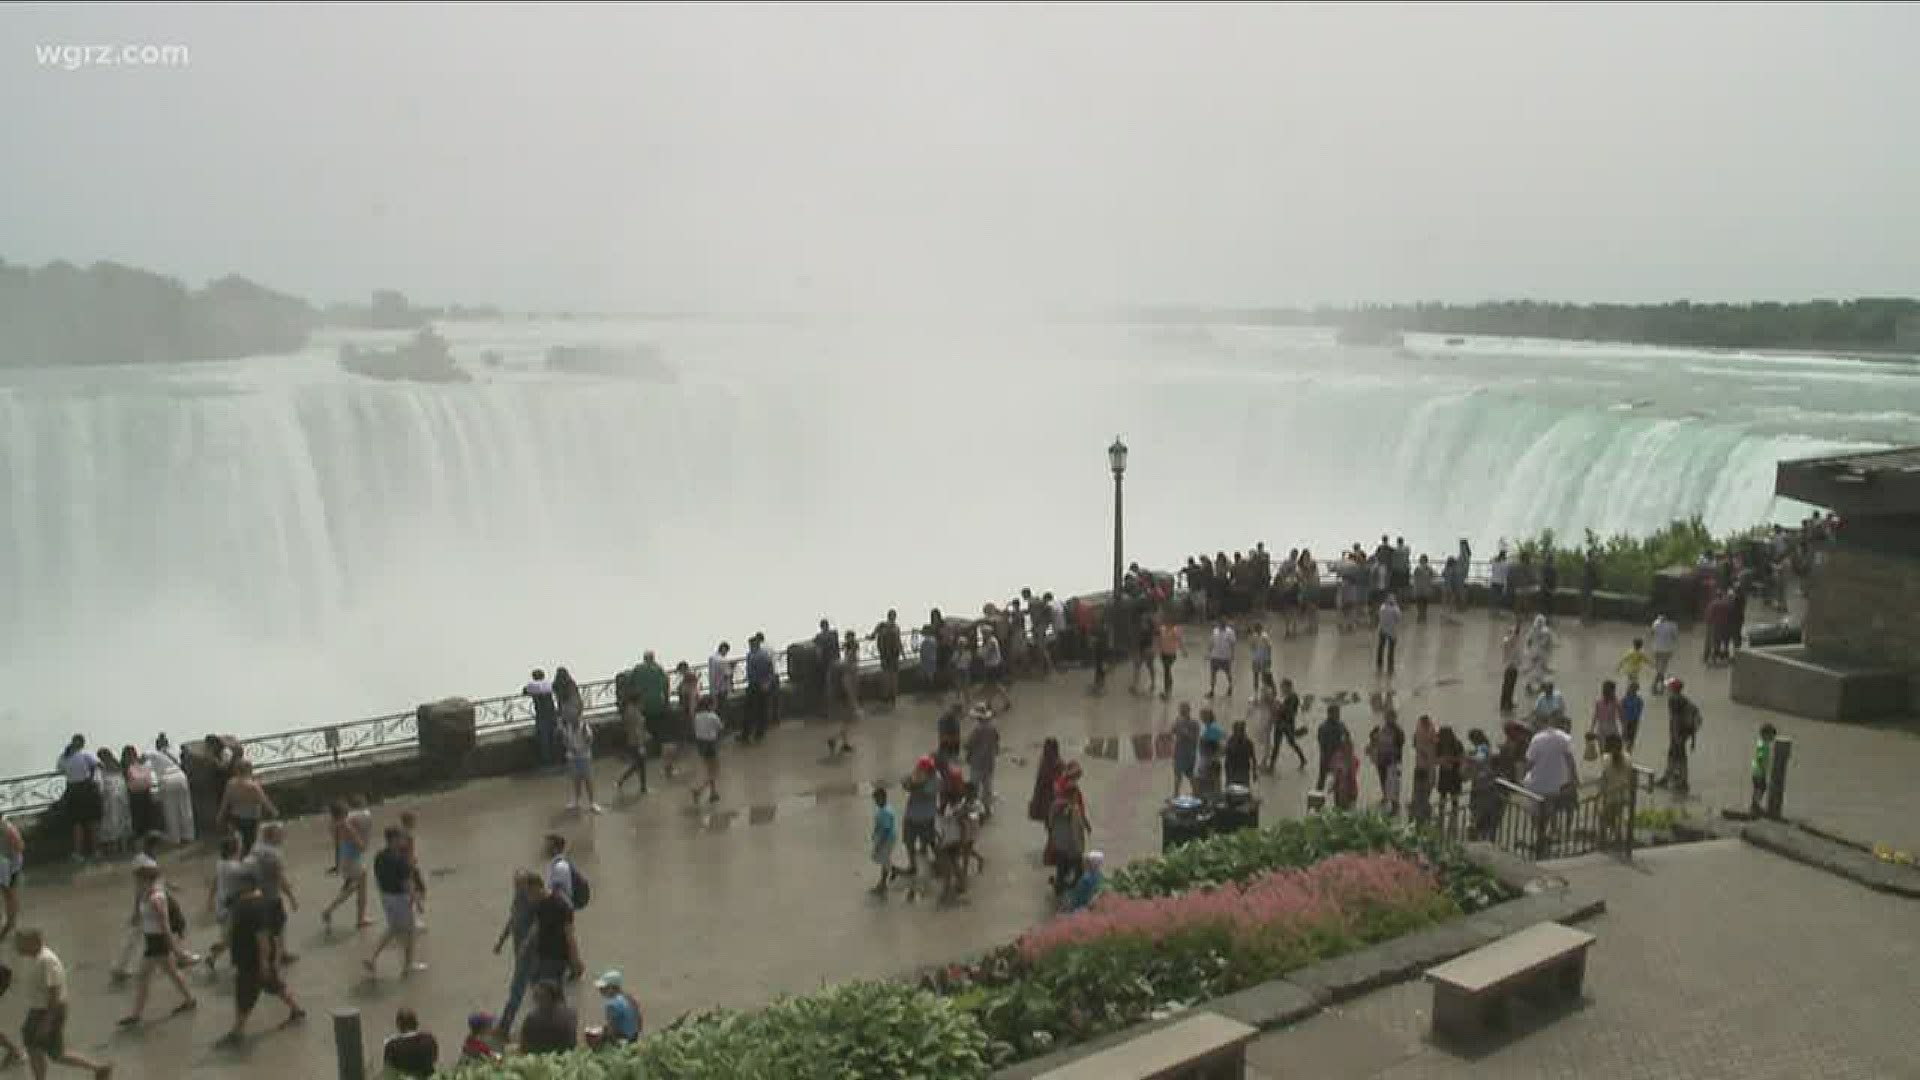 Memorial Day weekend is typically the kick-off to a traditional summer tourism season in Niagara Falls. 
This year will likely look a lot different because of Covid.